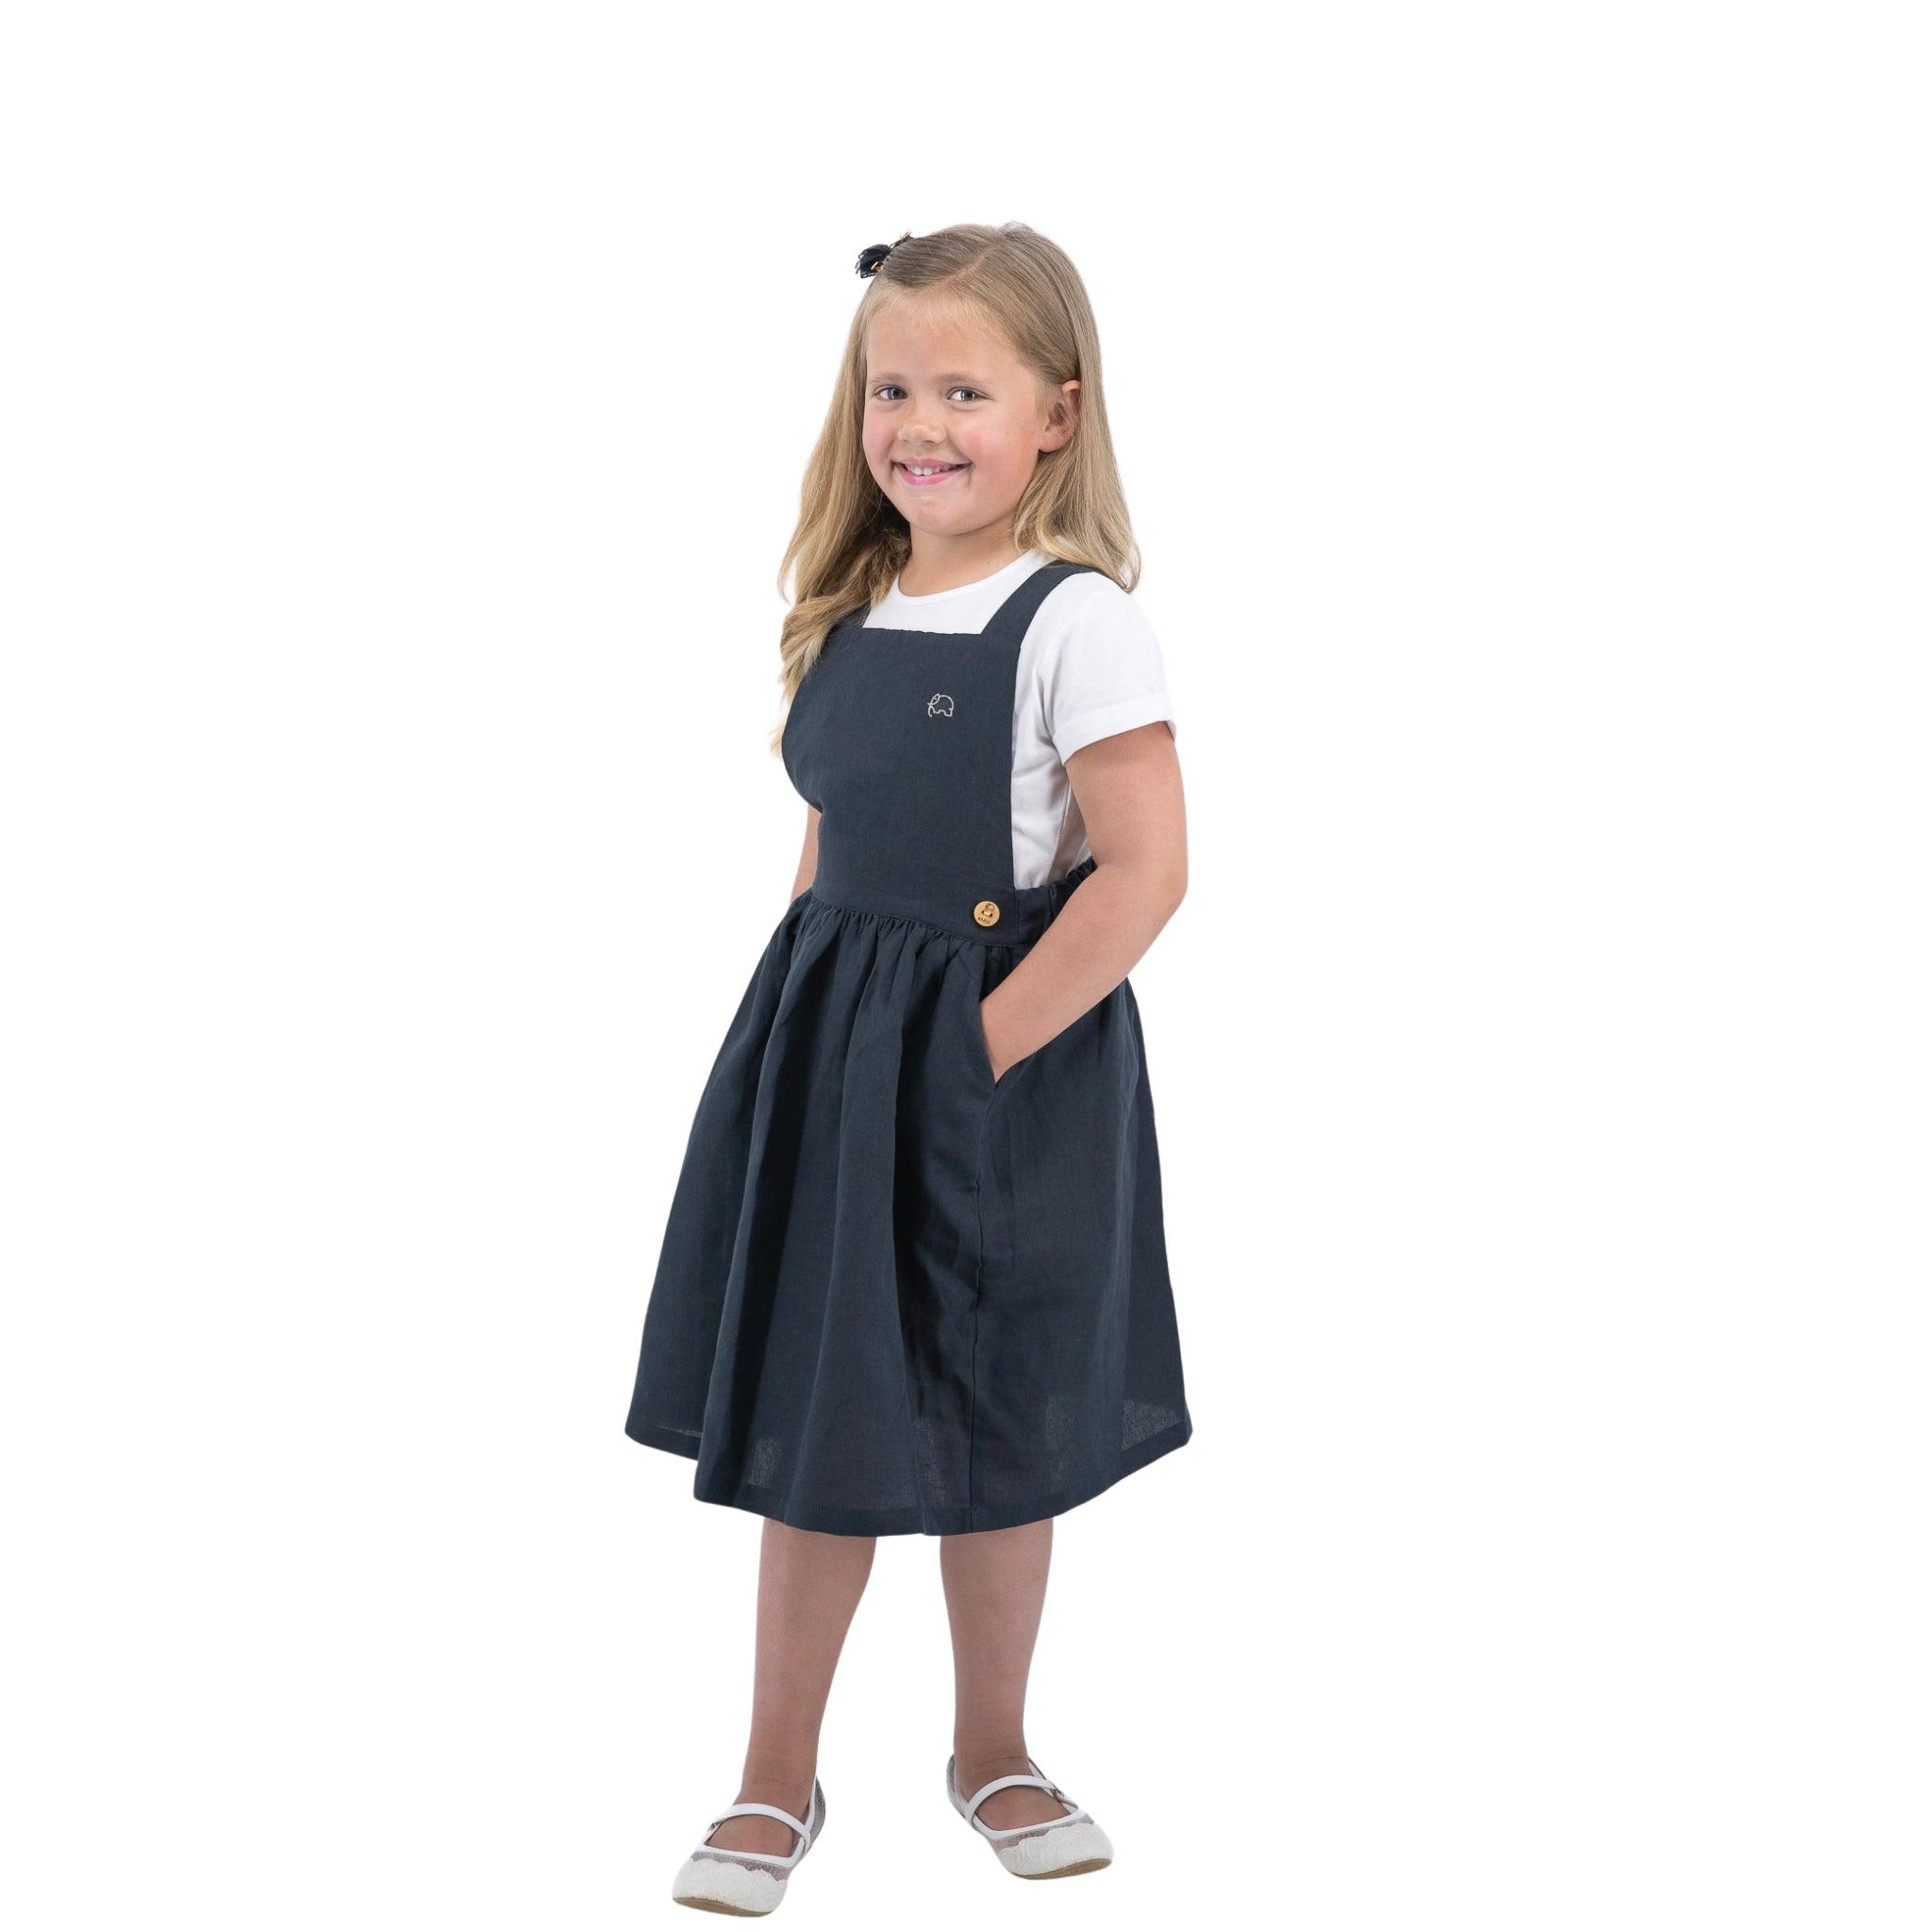 A young girl smiling, wearing a Karee ebony black linen pinafore for girls and white shirt, standing against a white background.